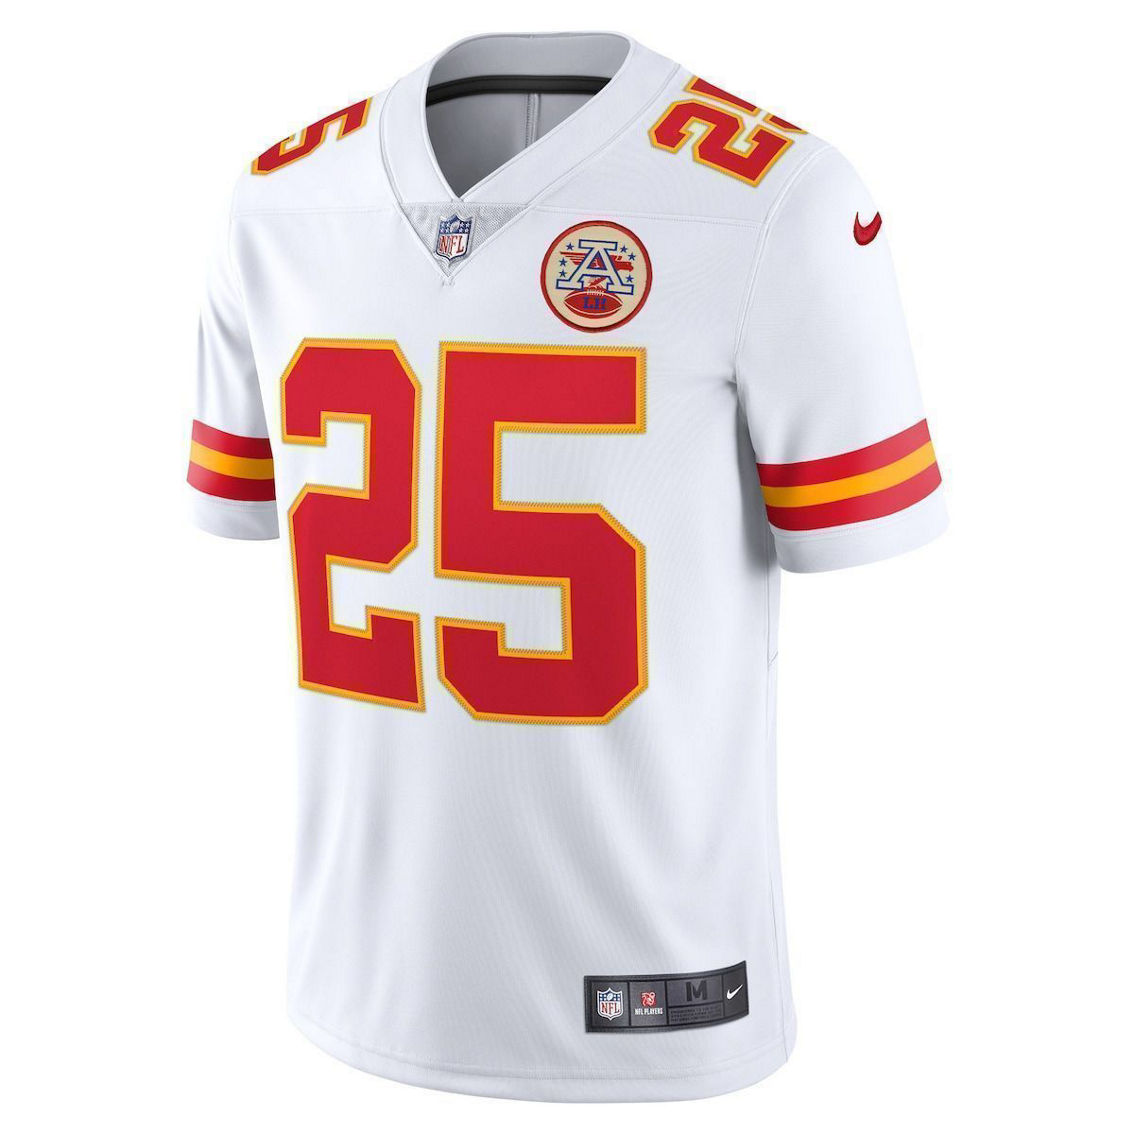 Nike Men's Clyde Edwards-Helaire White Kansas City Chiefs Vapor Limited Jersey - Image 3 of 4